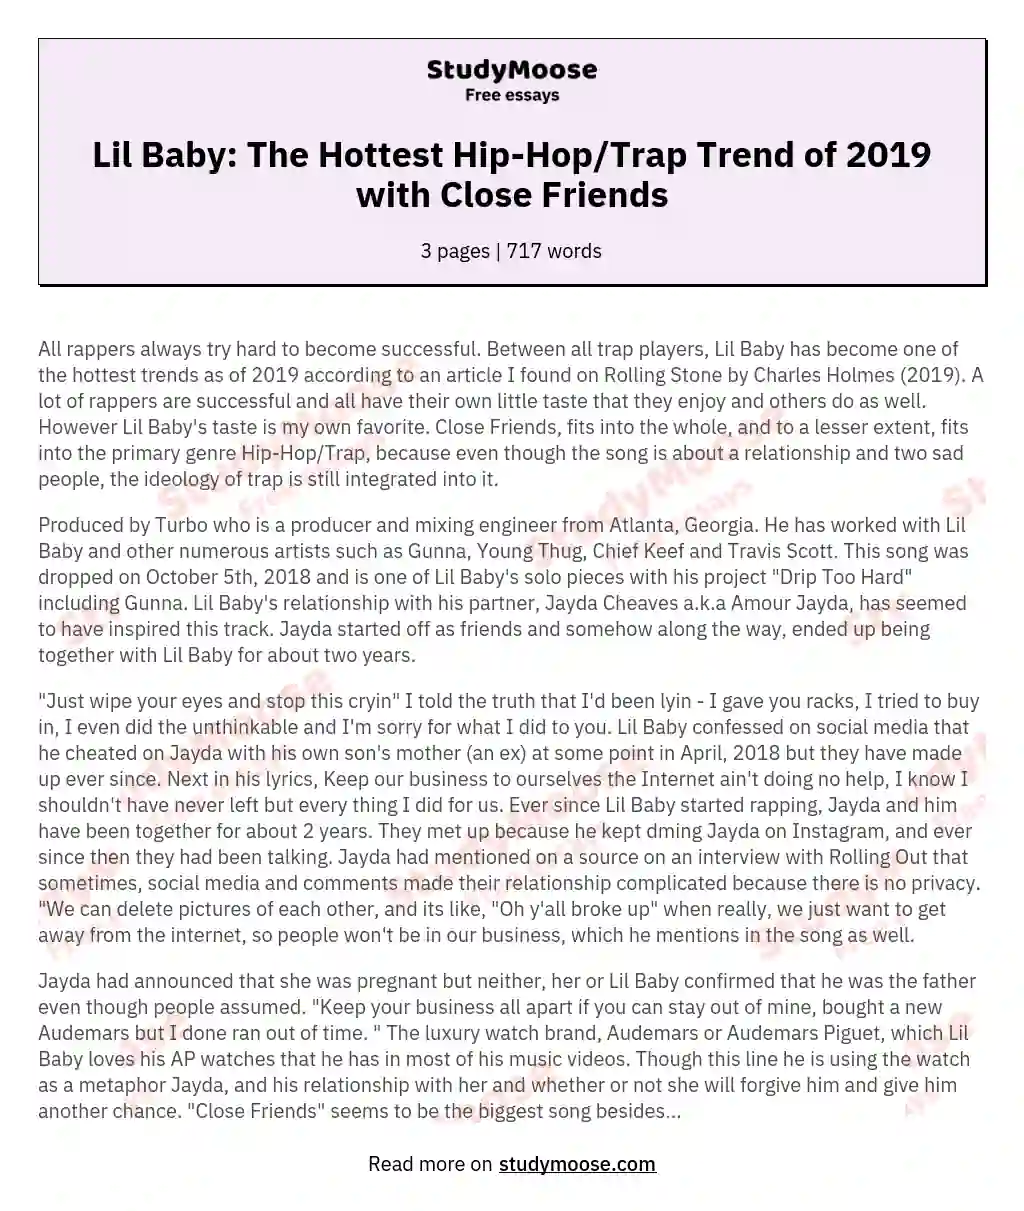 Lil Baby: The Hottest Hip-Hop/Trap Trend of 2019 with Close Friends essay